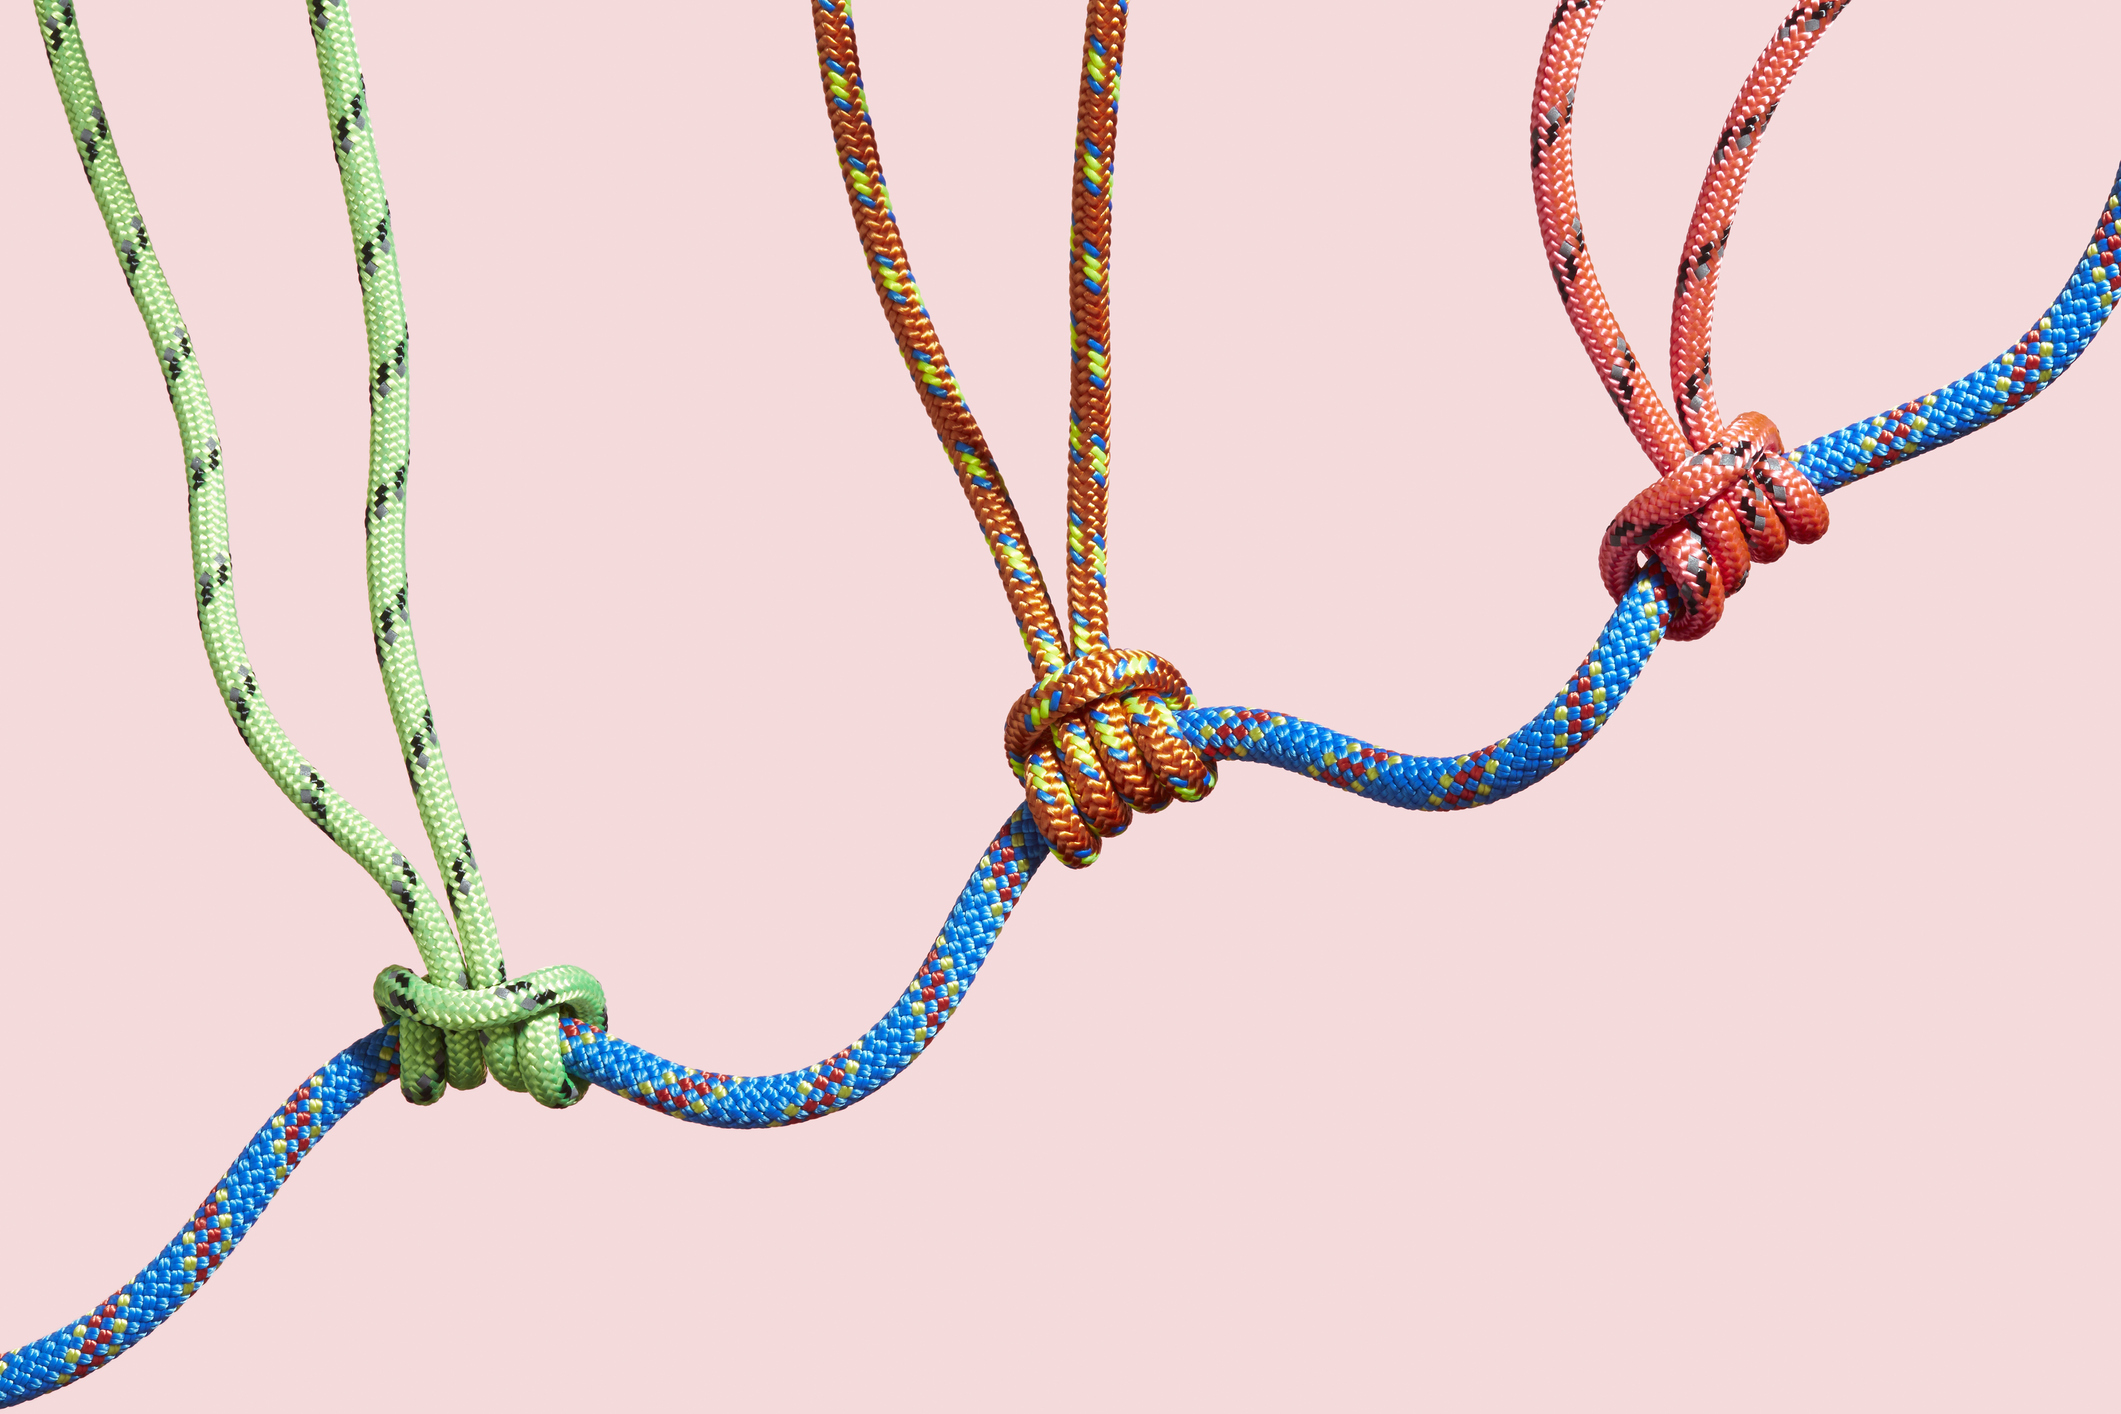 Three colored ropes supporting a large rope